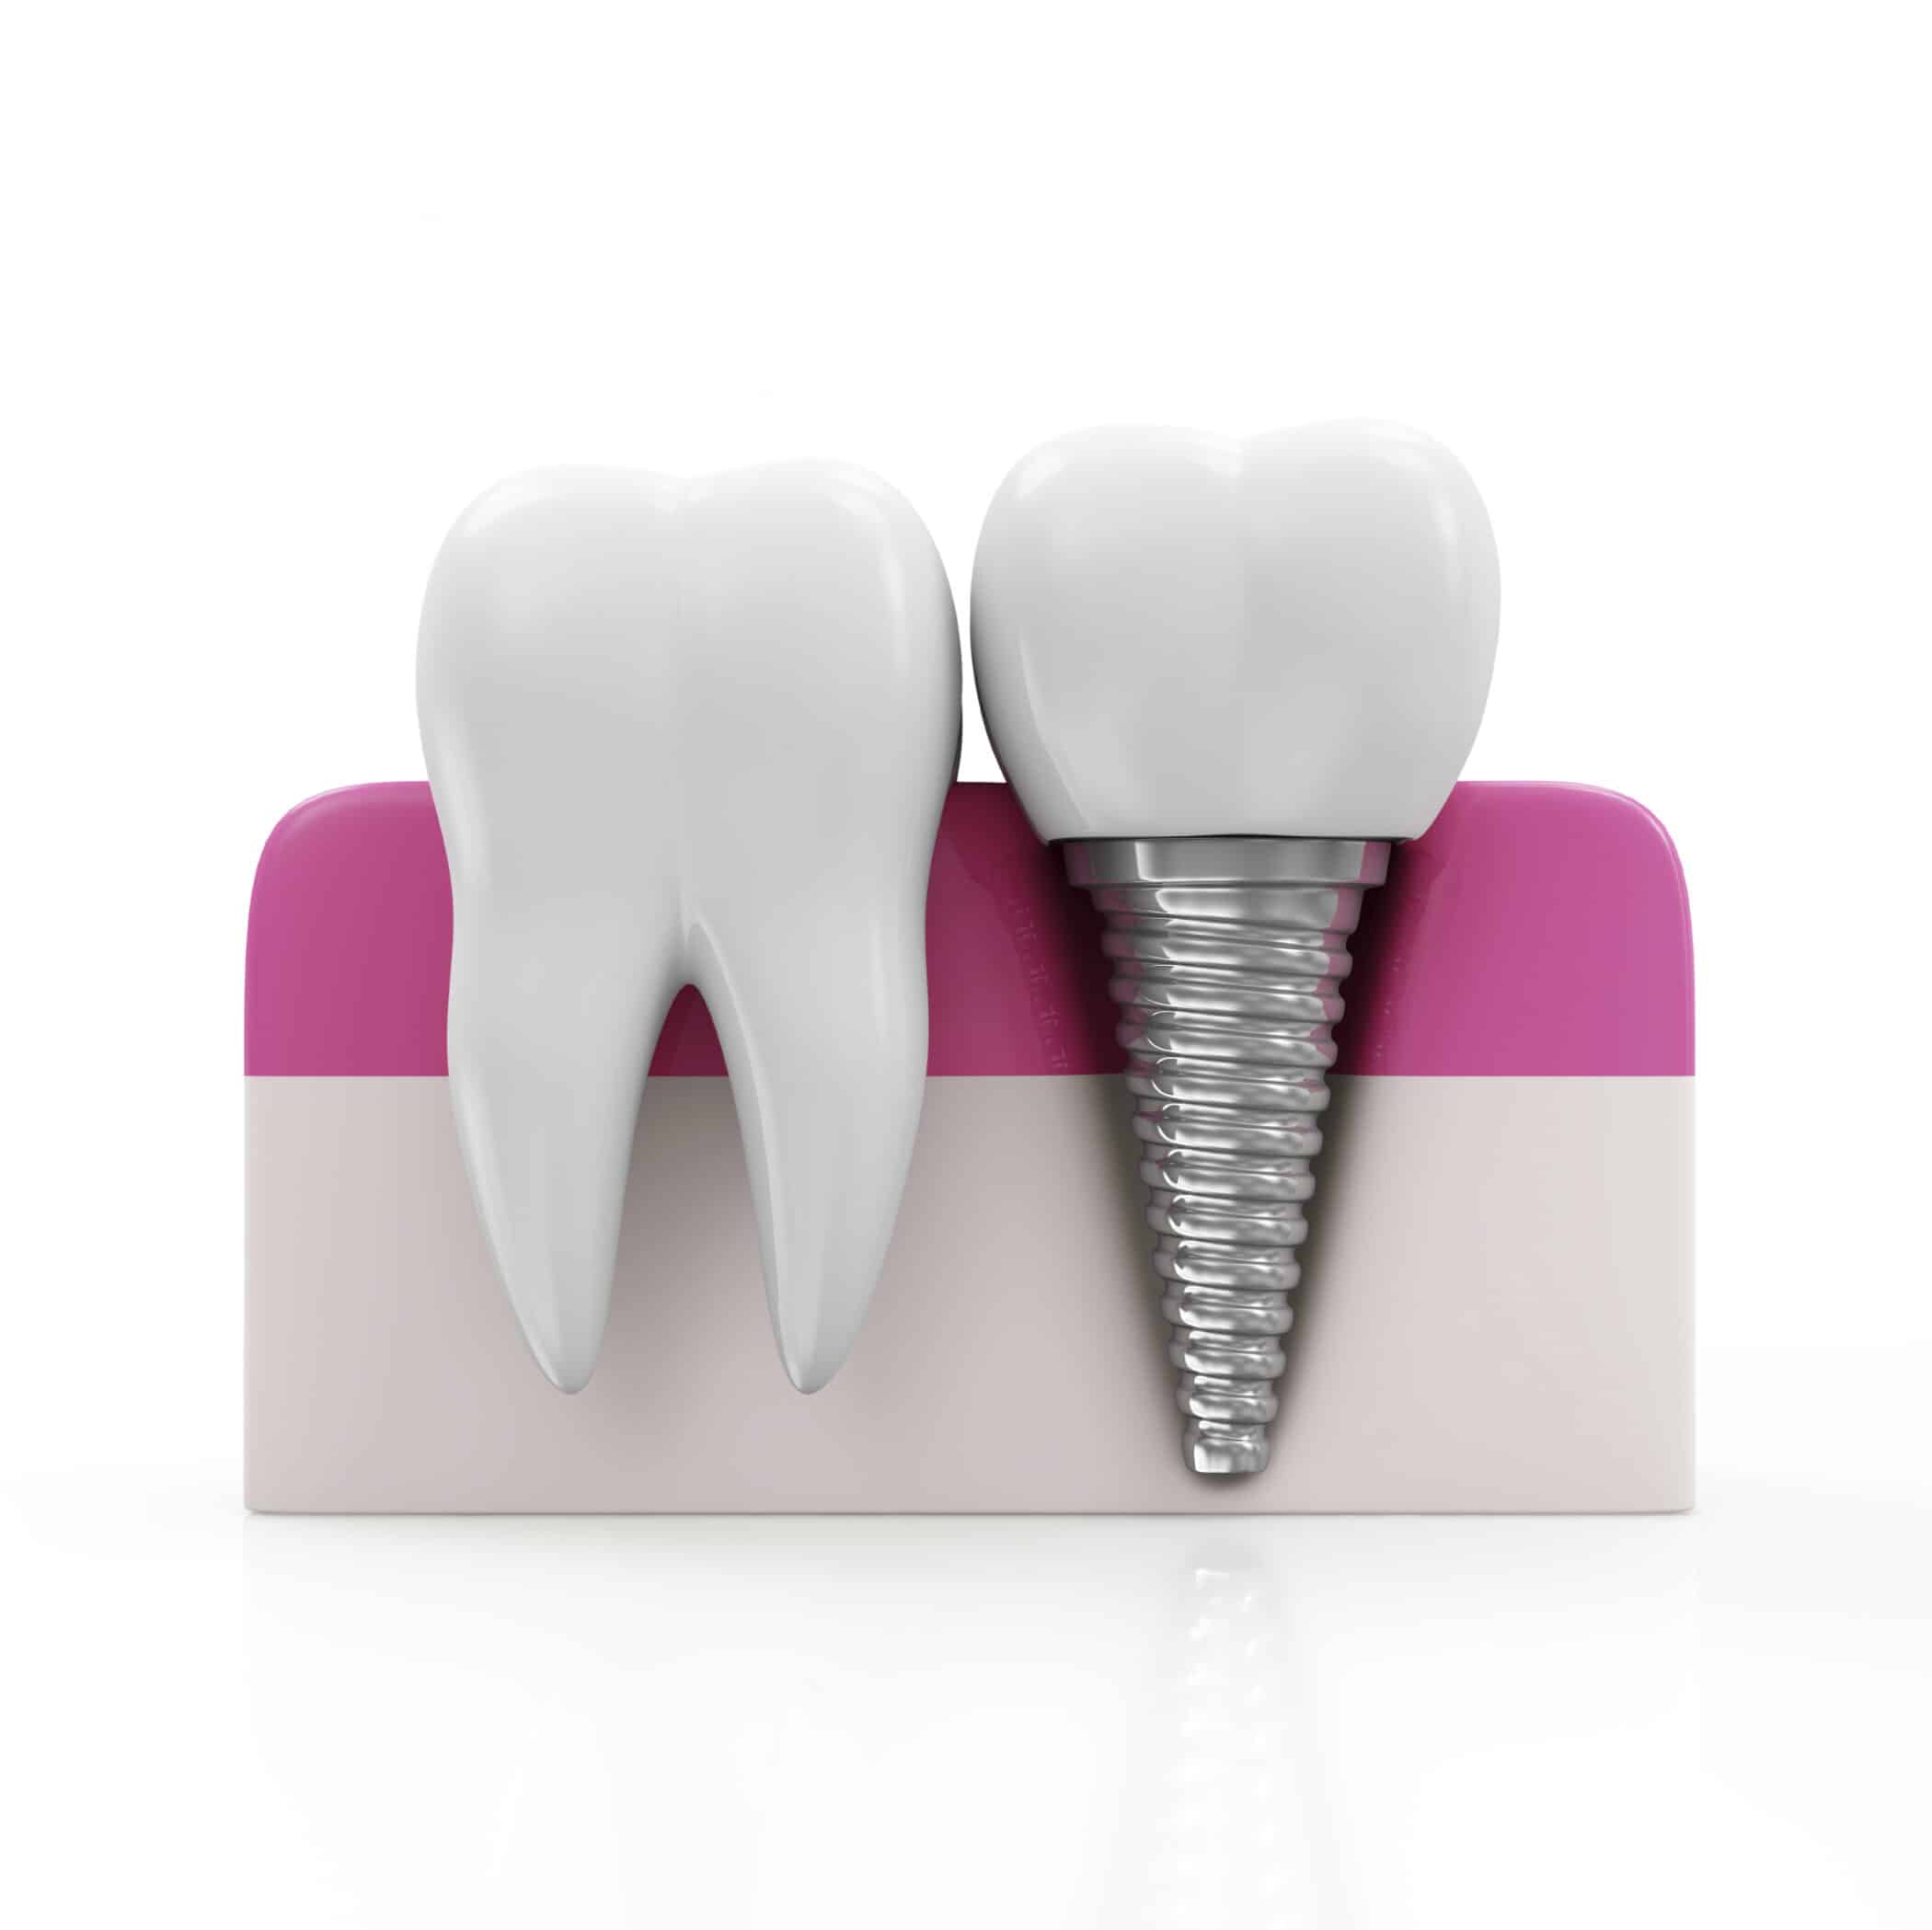 Implant-tooth and healthy-tooth